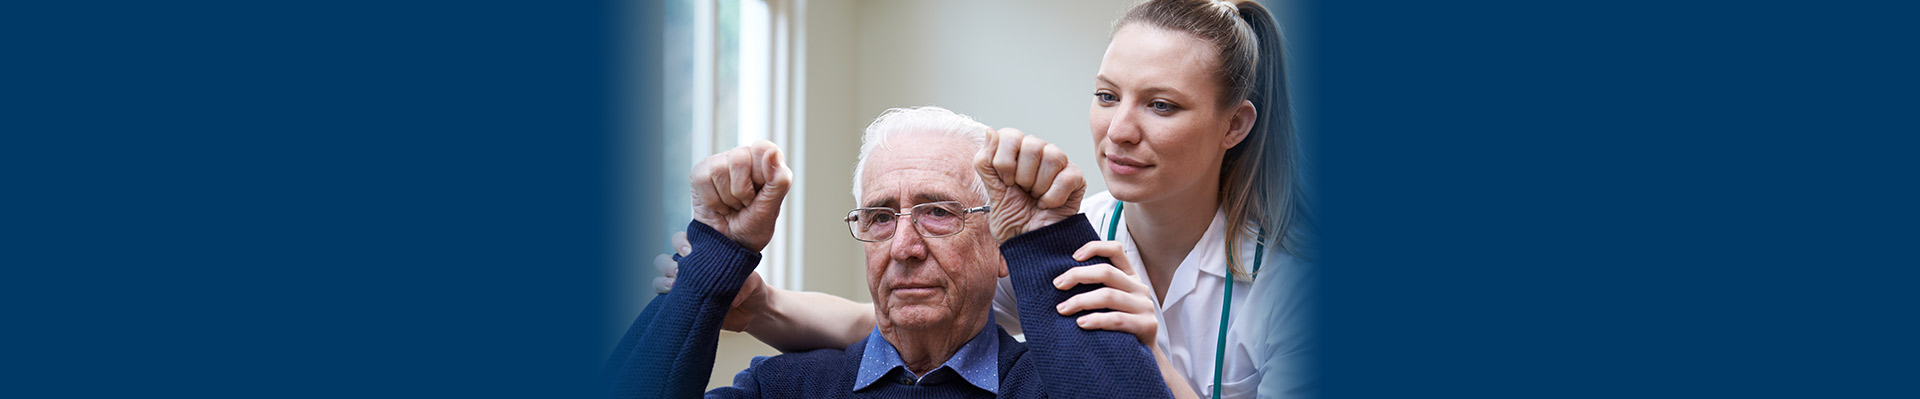 Banner picture of a elderly male patient doing Neurological Rehab. There is a female Medical Professional behind him lifting his arms up as he clenches his fist.